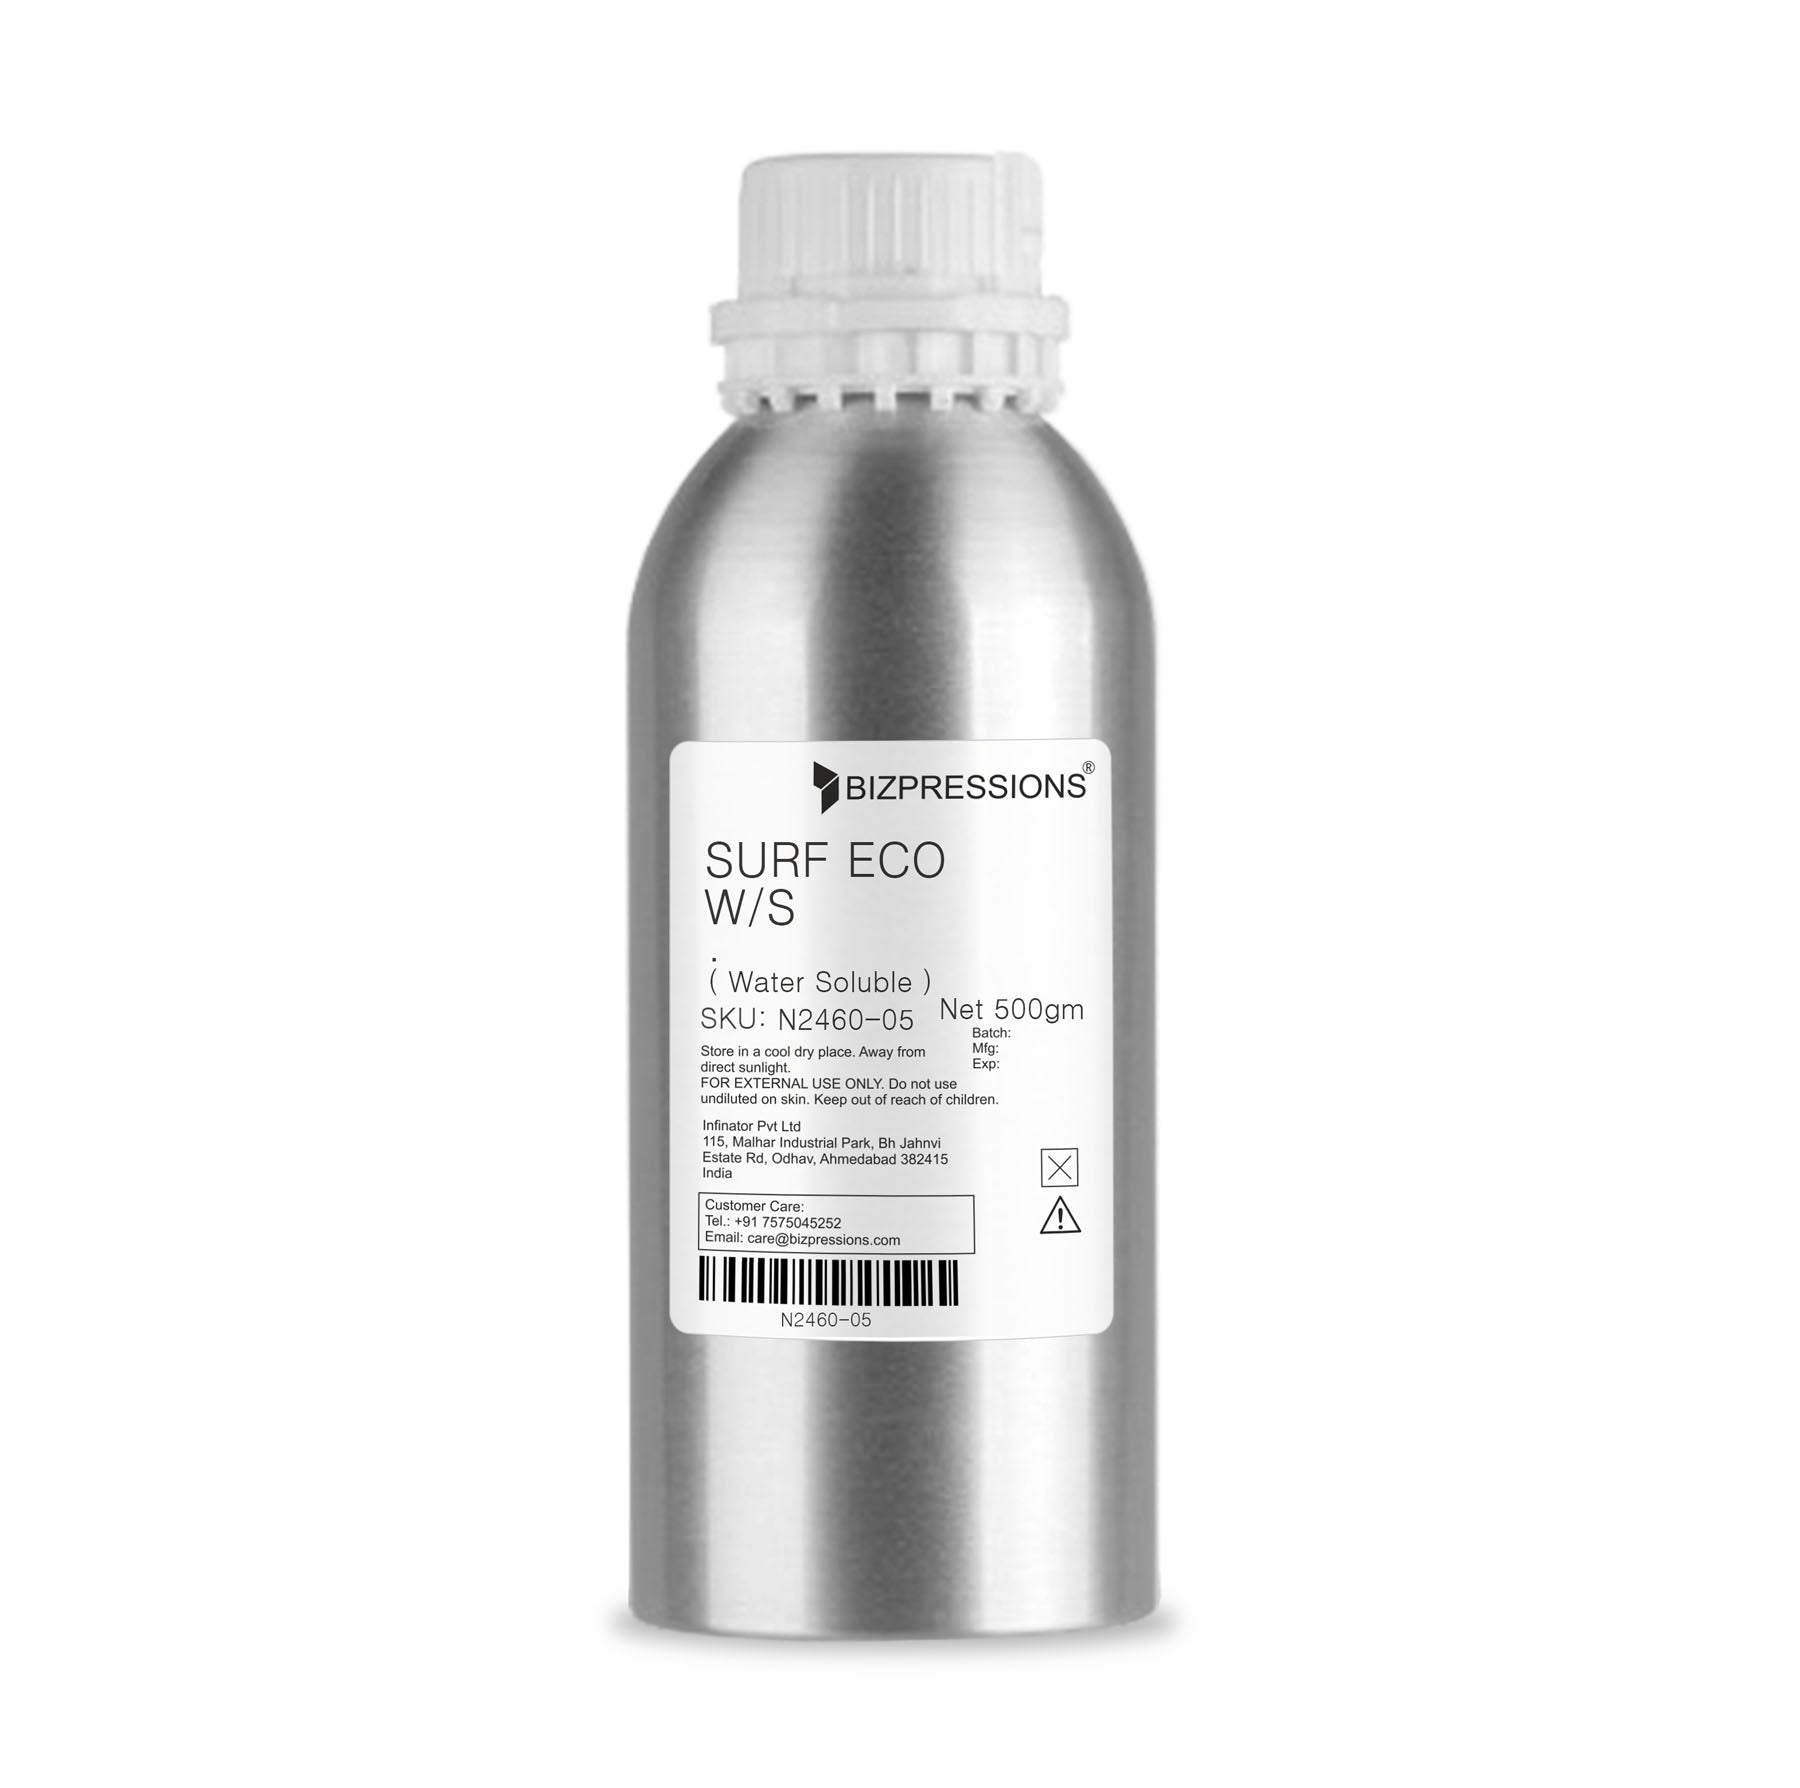 SURF ECO W/S - Fragrance ( Water Soluble ) - 500 gm